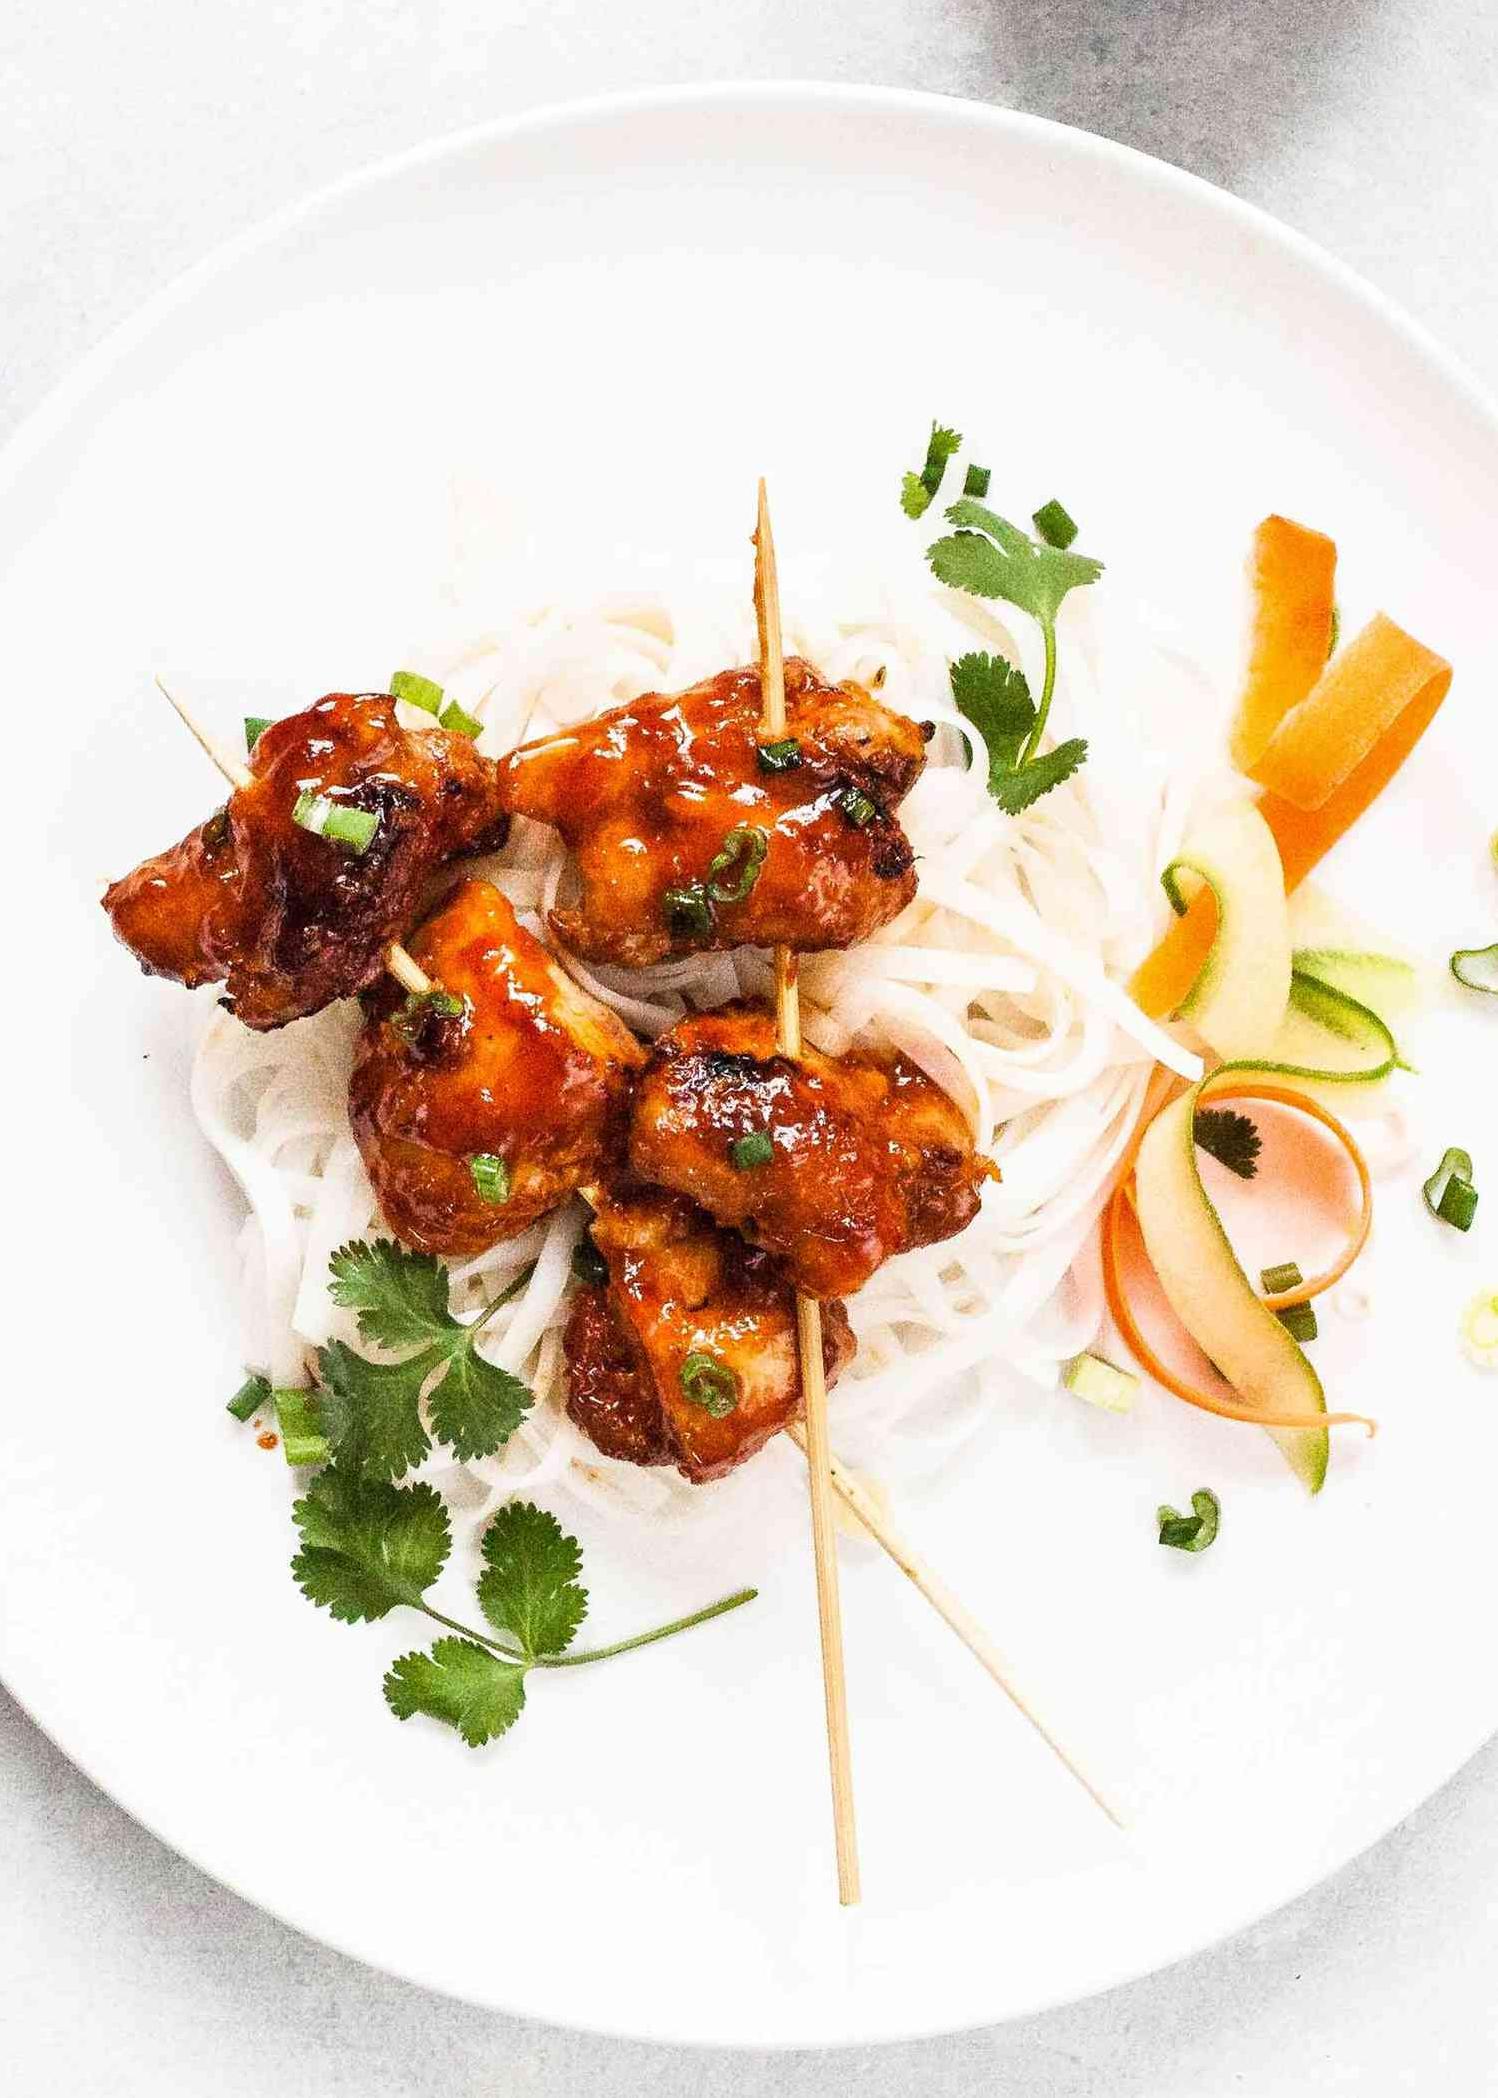 Vietnamese Chicken Skewers: Experience the Authentic Flavors